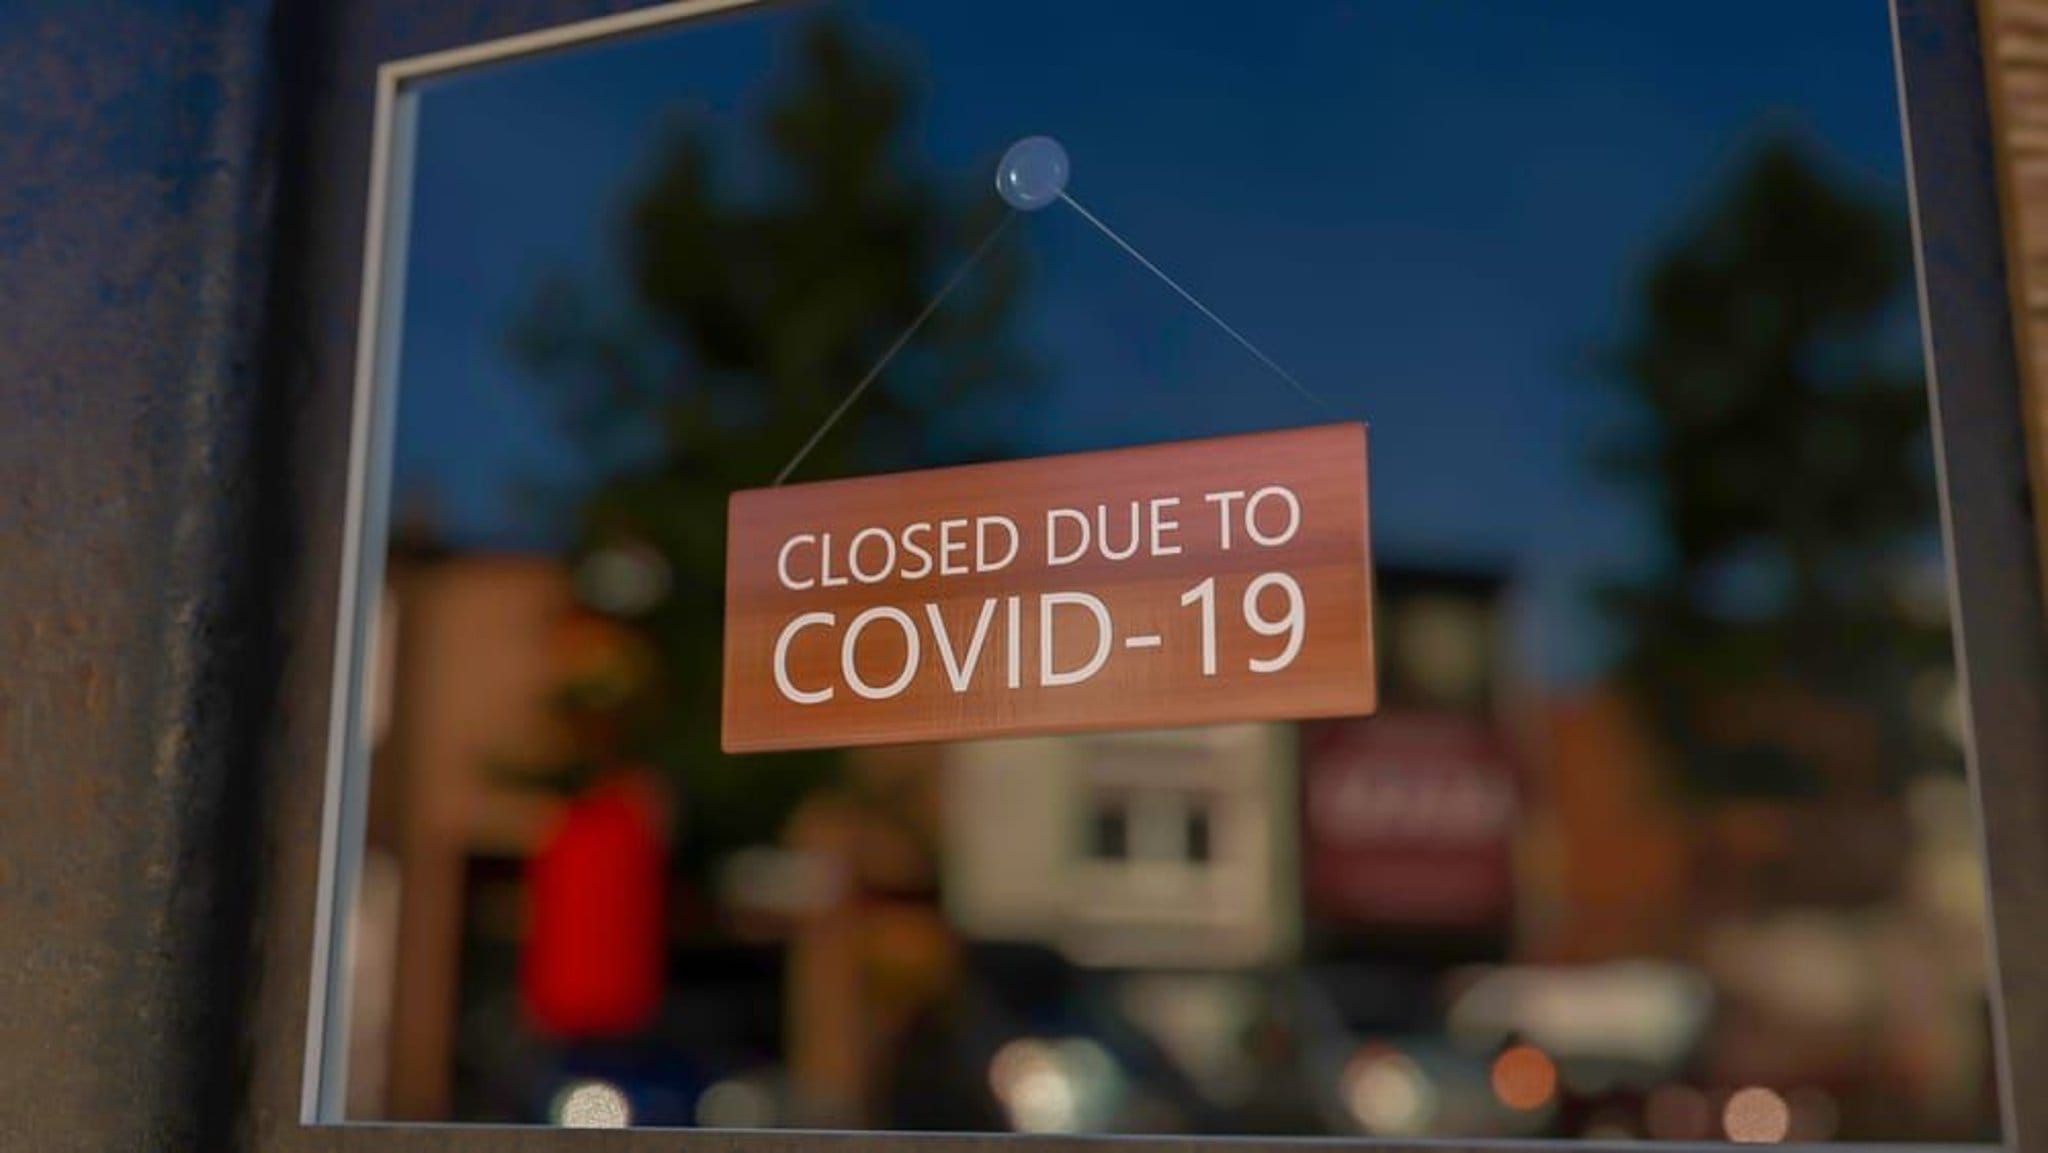 Employee Retention Credit For Businesses Affected By COVID-19